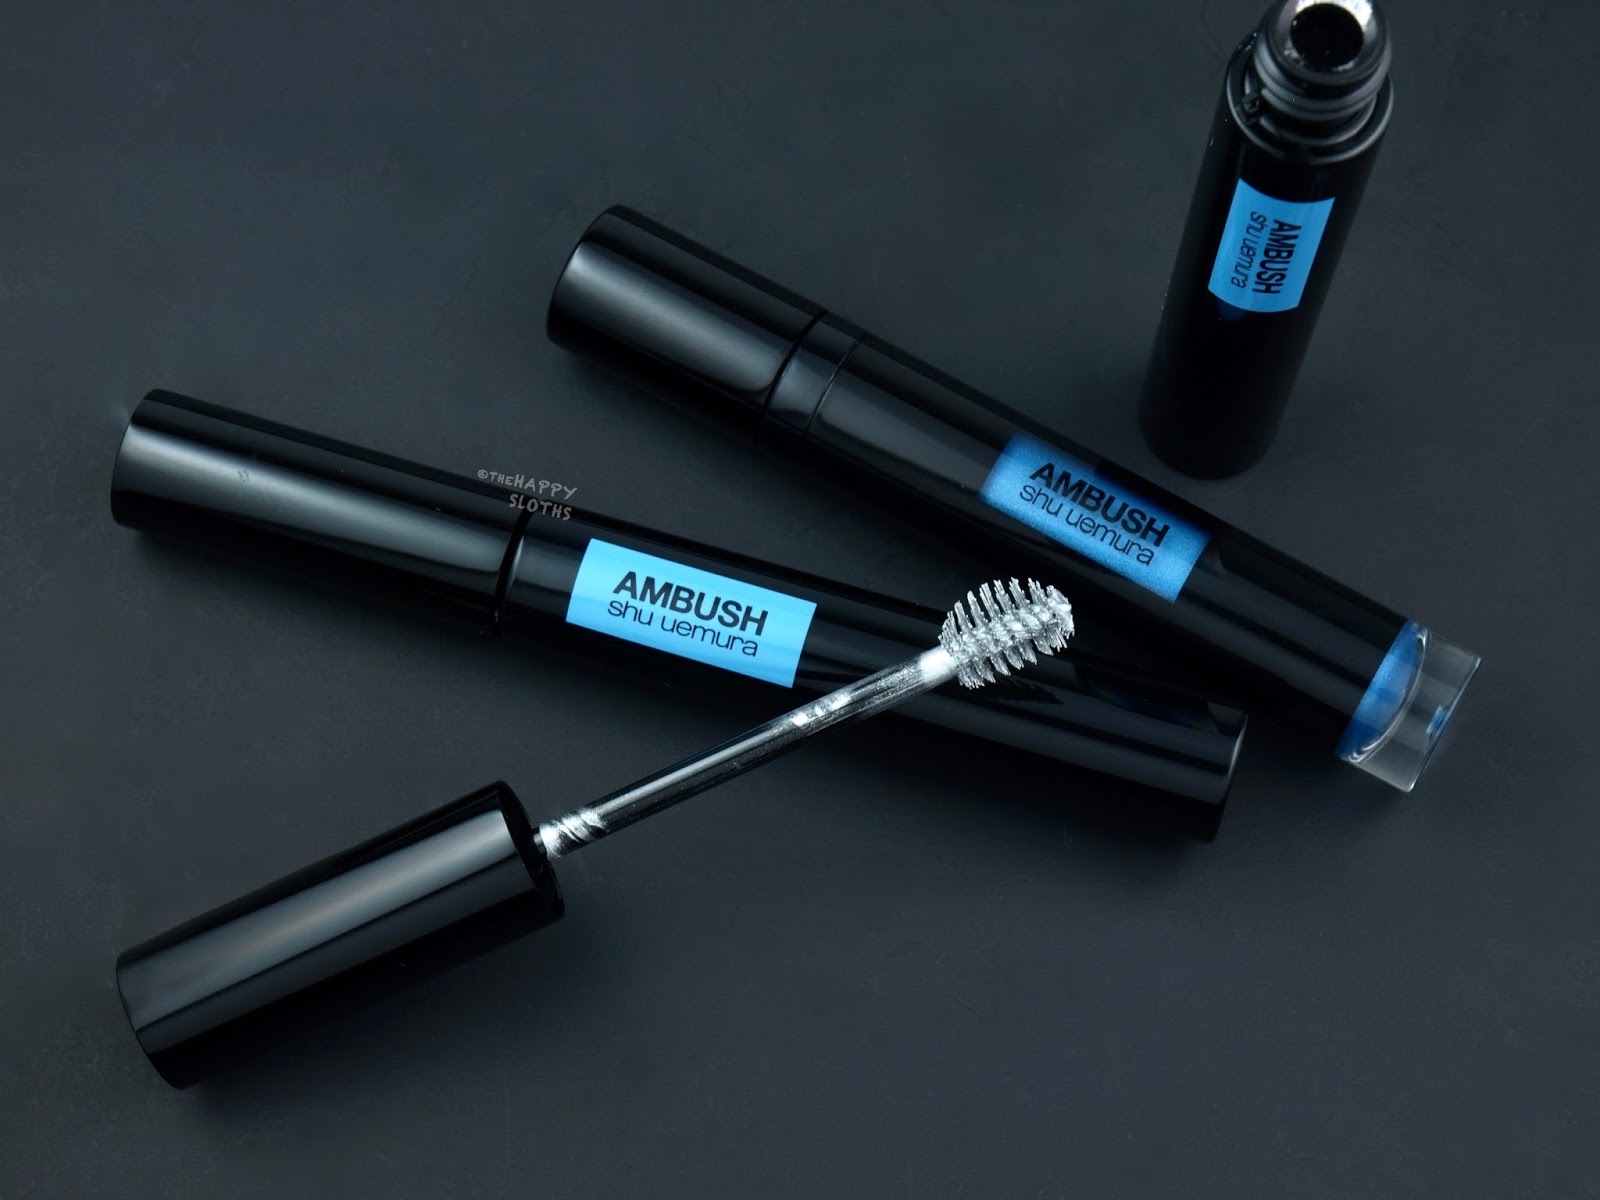 Shu Uemura x AMBUSH Collection | Eyebrow Manicure & Eye Foil: Review and Swatches